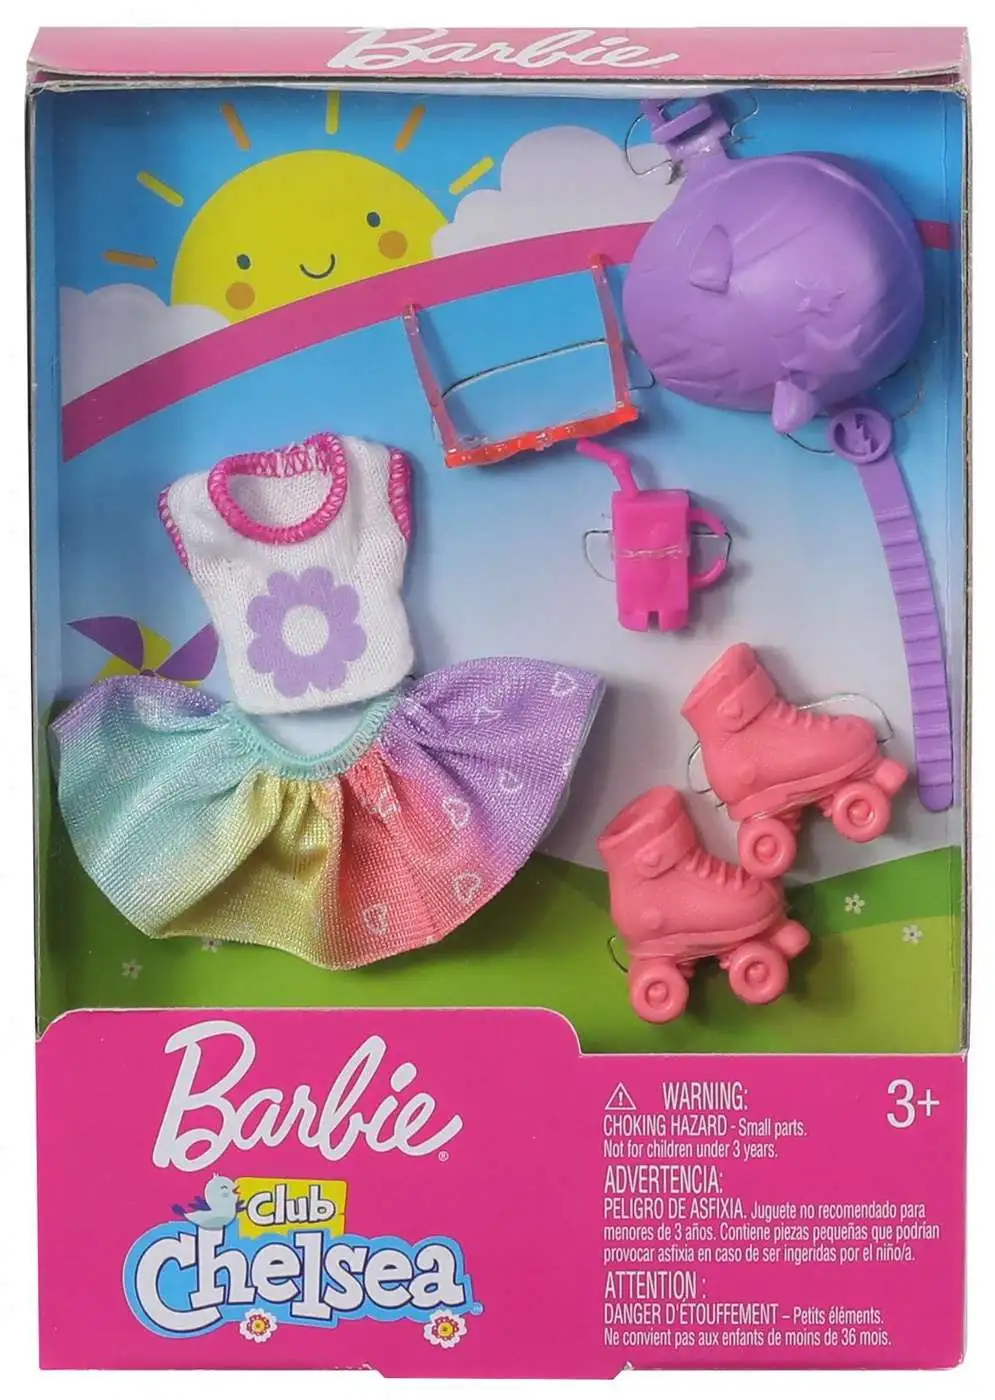 Barbie Club Chelsea Roller Skating Accessory Pack Mattel Toys - ToyWiz